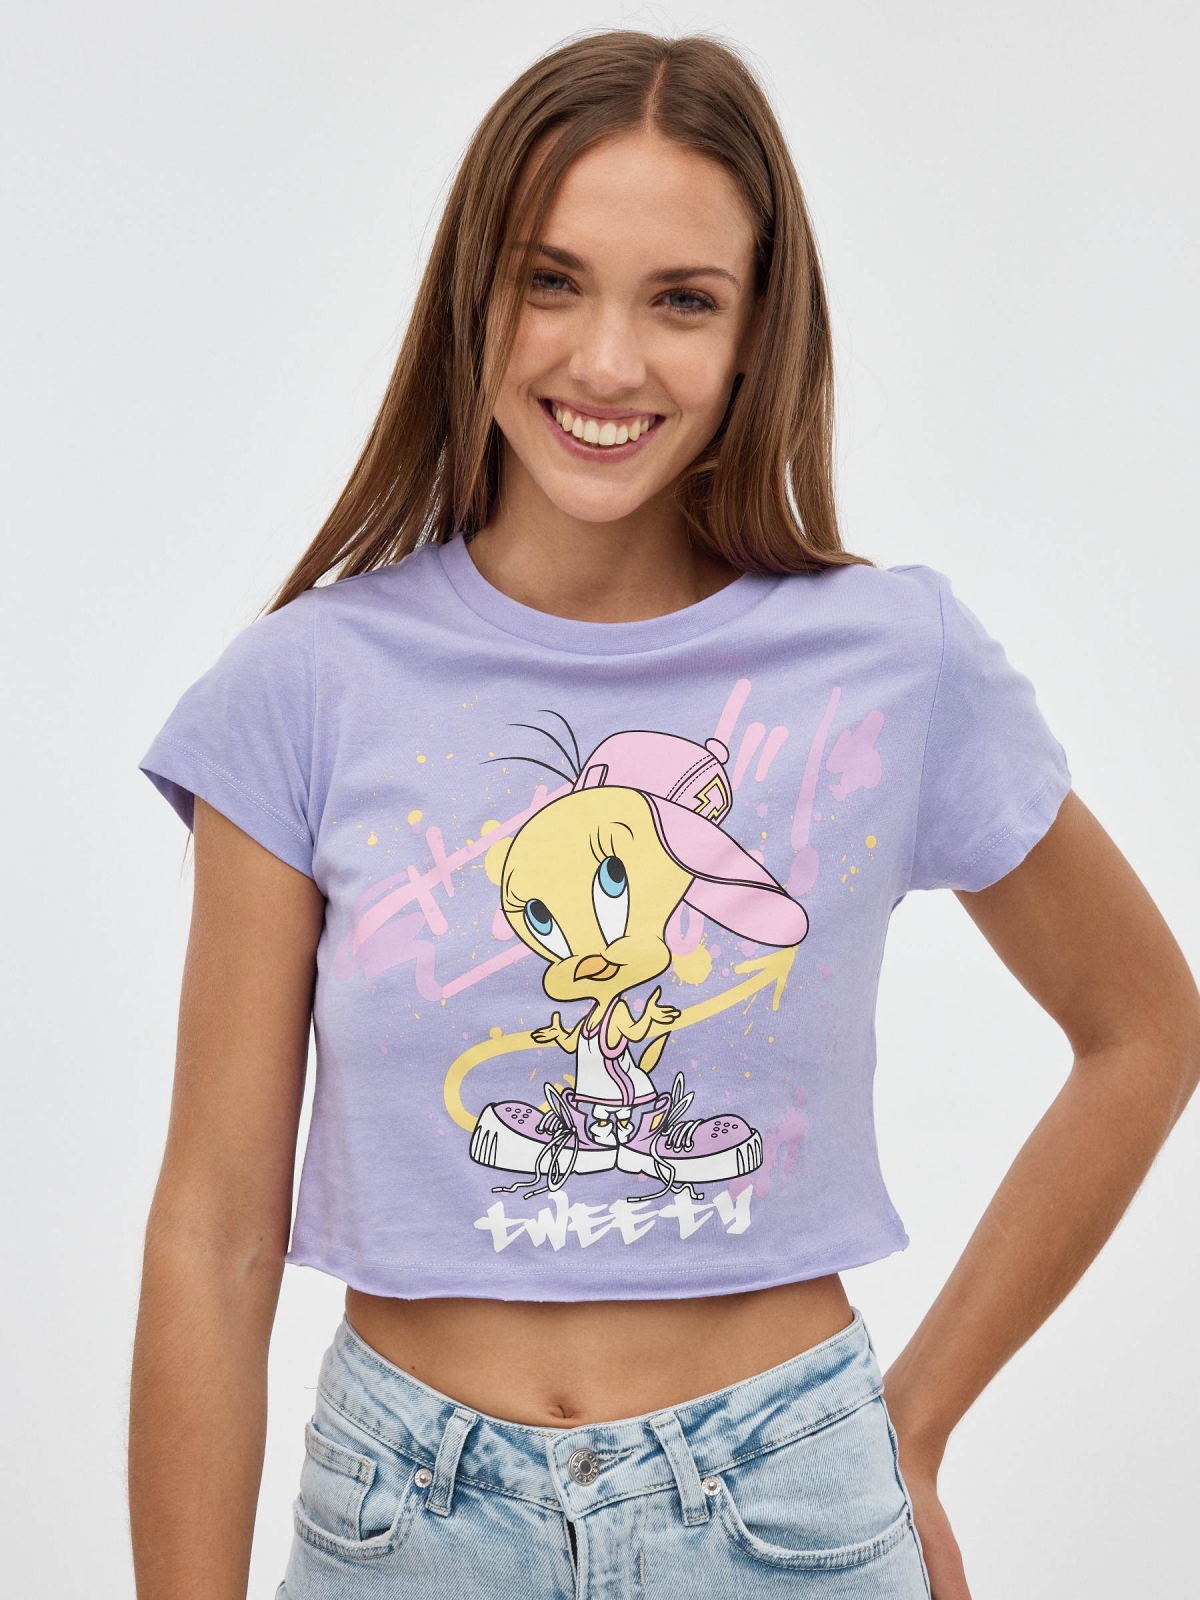 Tweety  t-shirt mauve middle front view